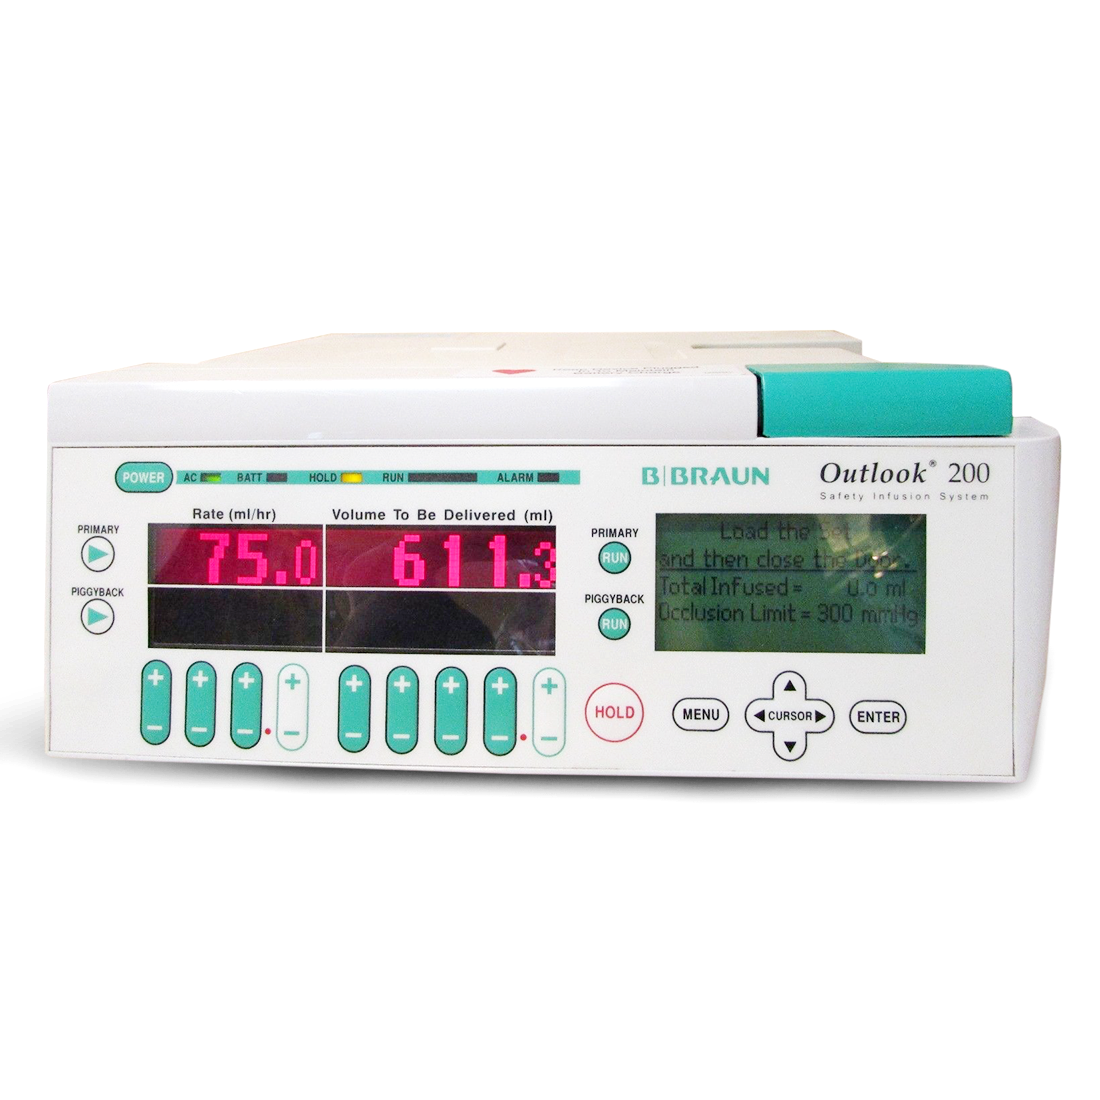 B Braun Outlook 200 Dual Channel Infusion Pump